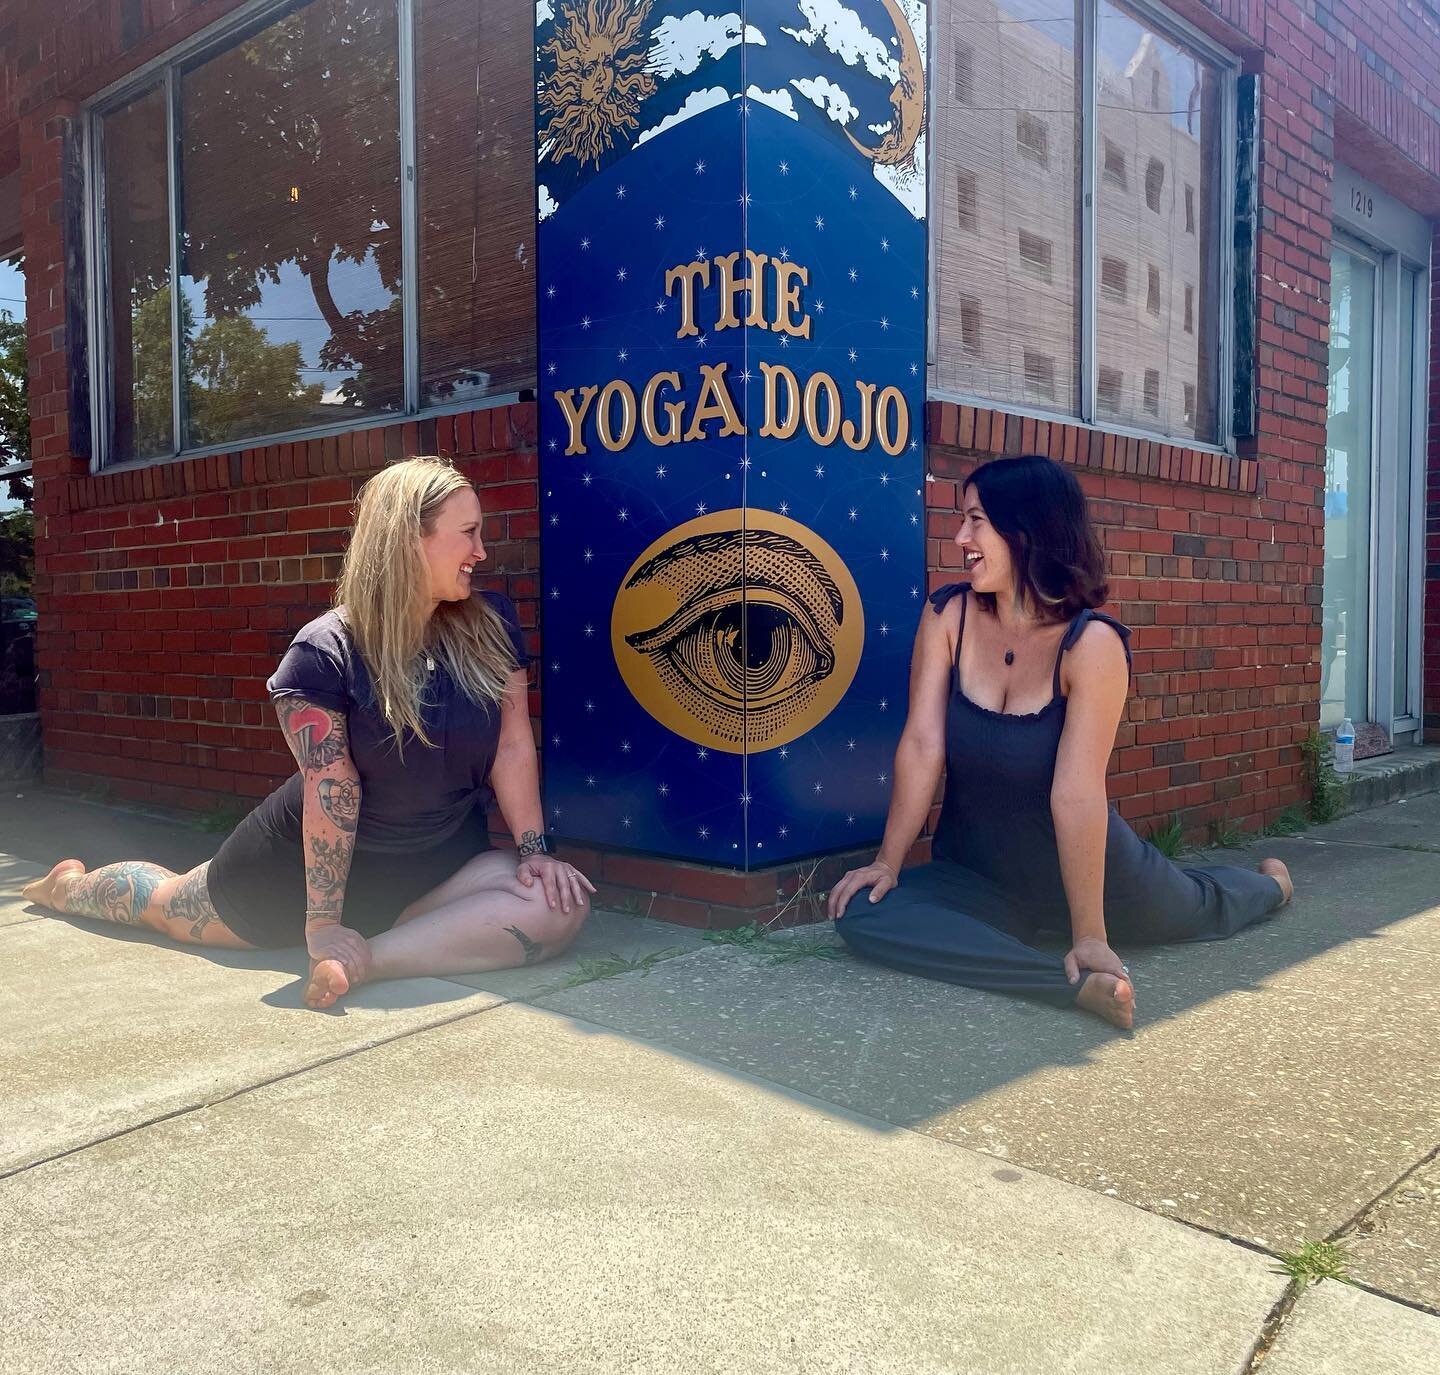 I&rsquo;m back, and excited to co-lead an Intro to Meridian Yoga workshop with one of my loves @oliviayohai on Sunday, 8/1. 🔮🧘🏻&zwj;♀️🧘🏼&zwj;♀️✨

Meridian Yoga Technique is a healing modality that can be applied to self or others. This system is